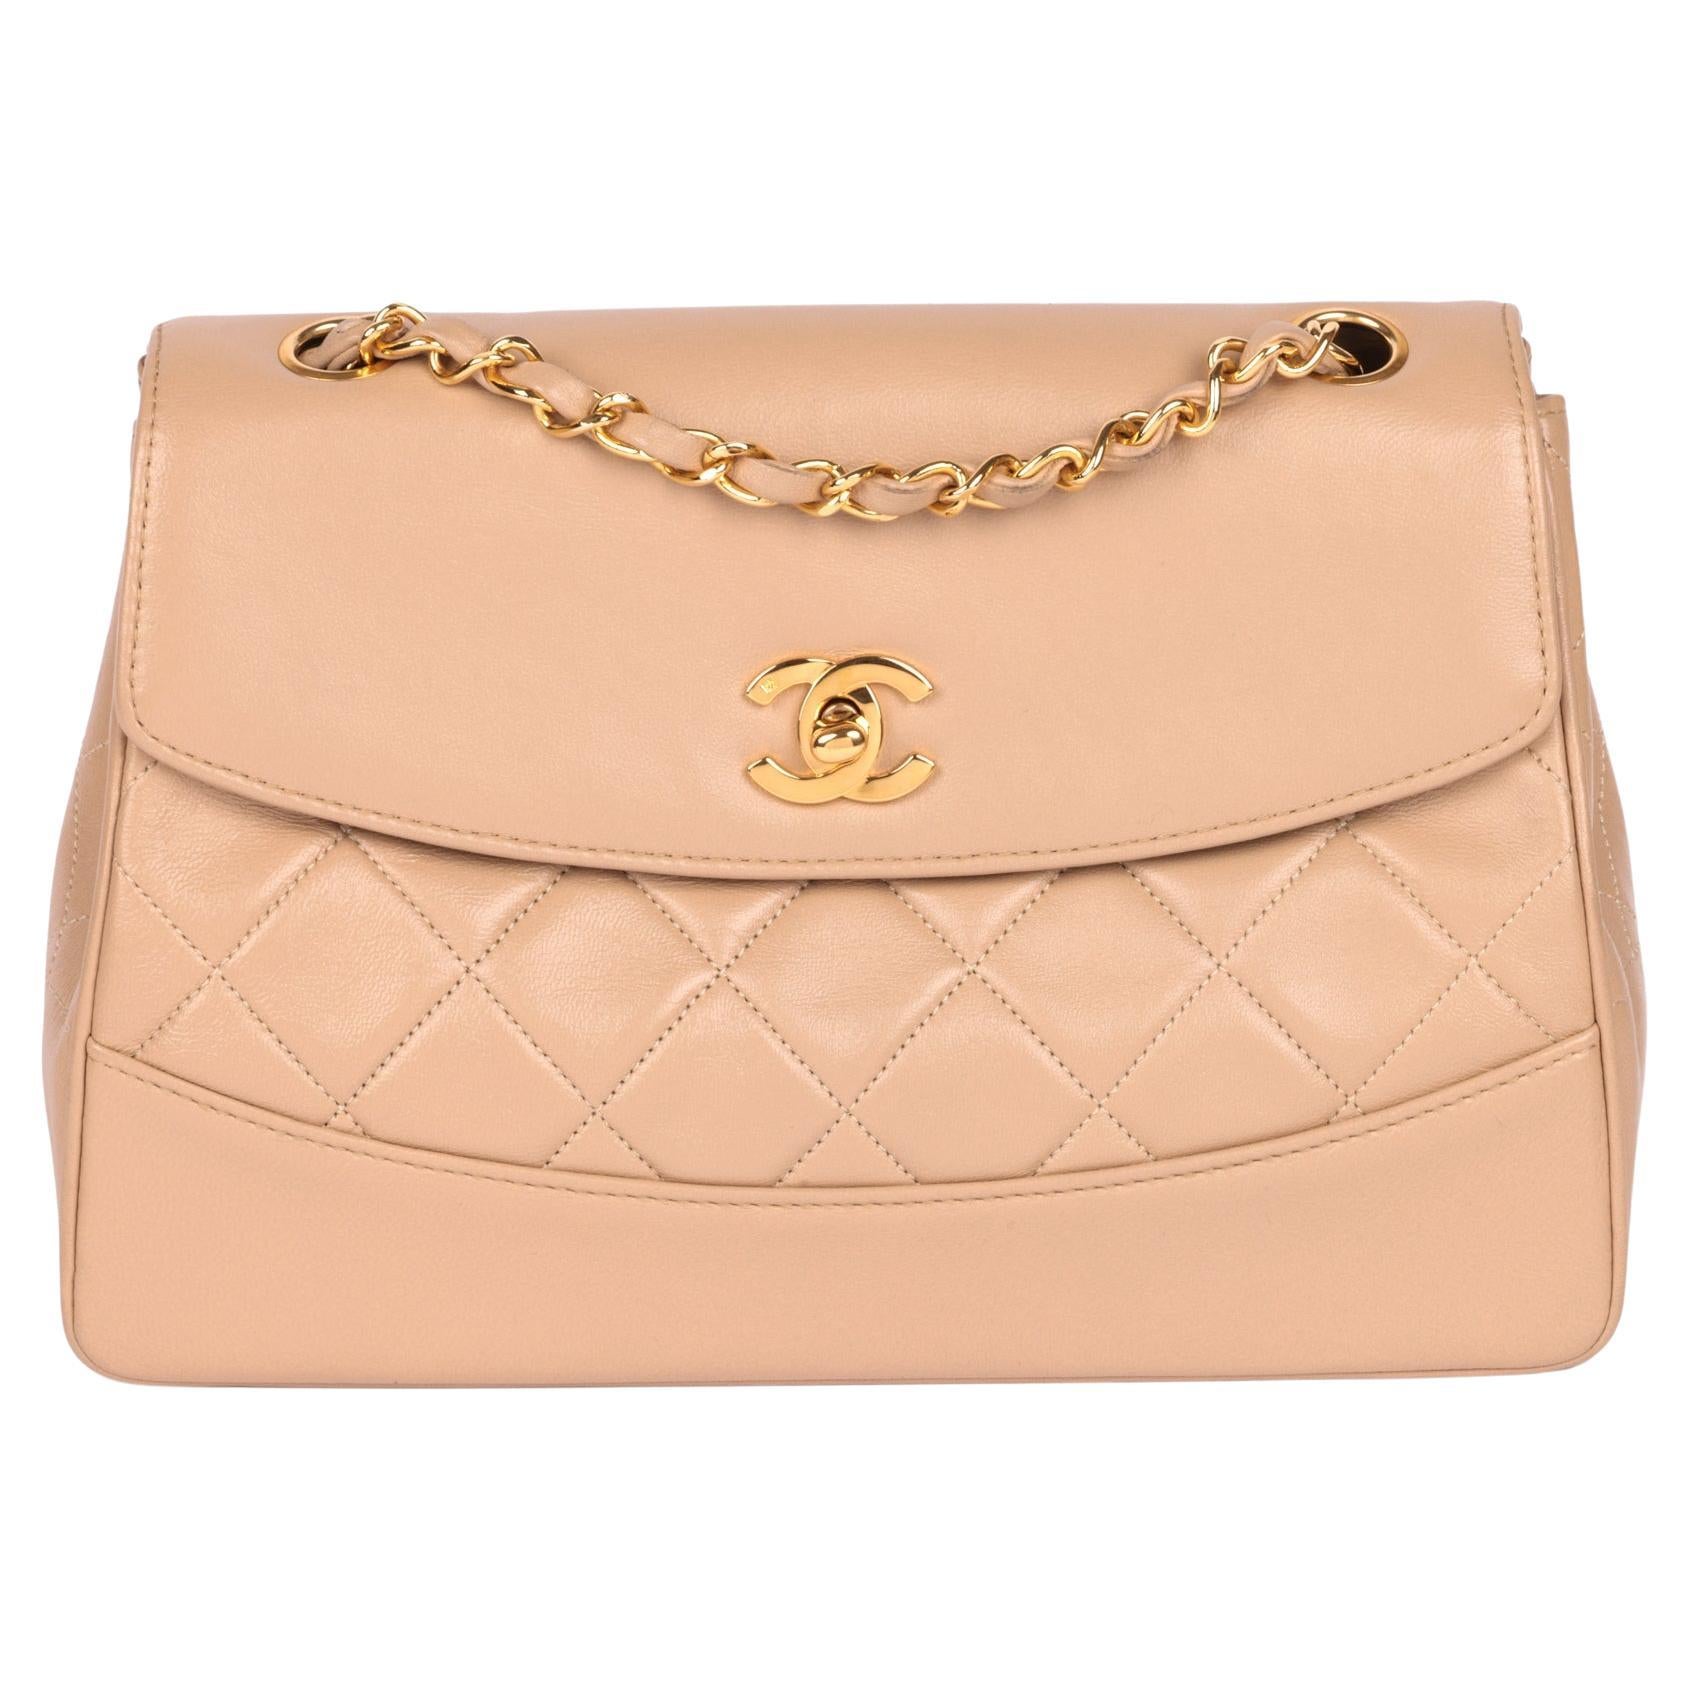 CHANEL Beige Quilted Lambskin Vintage Medium Classic Single Flap